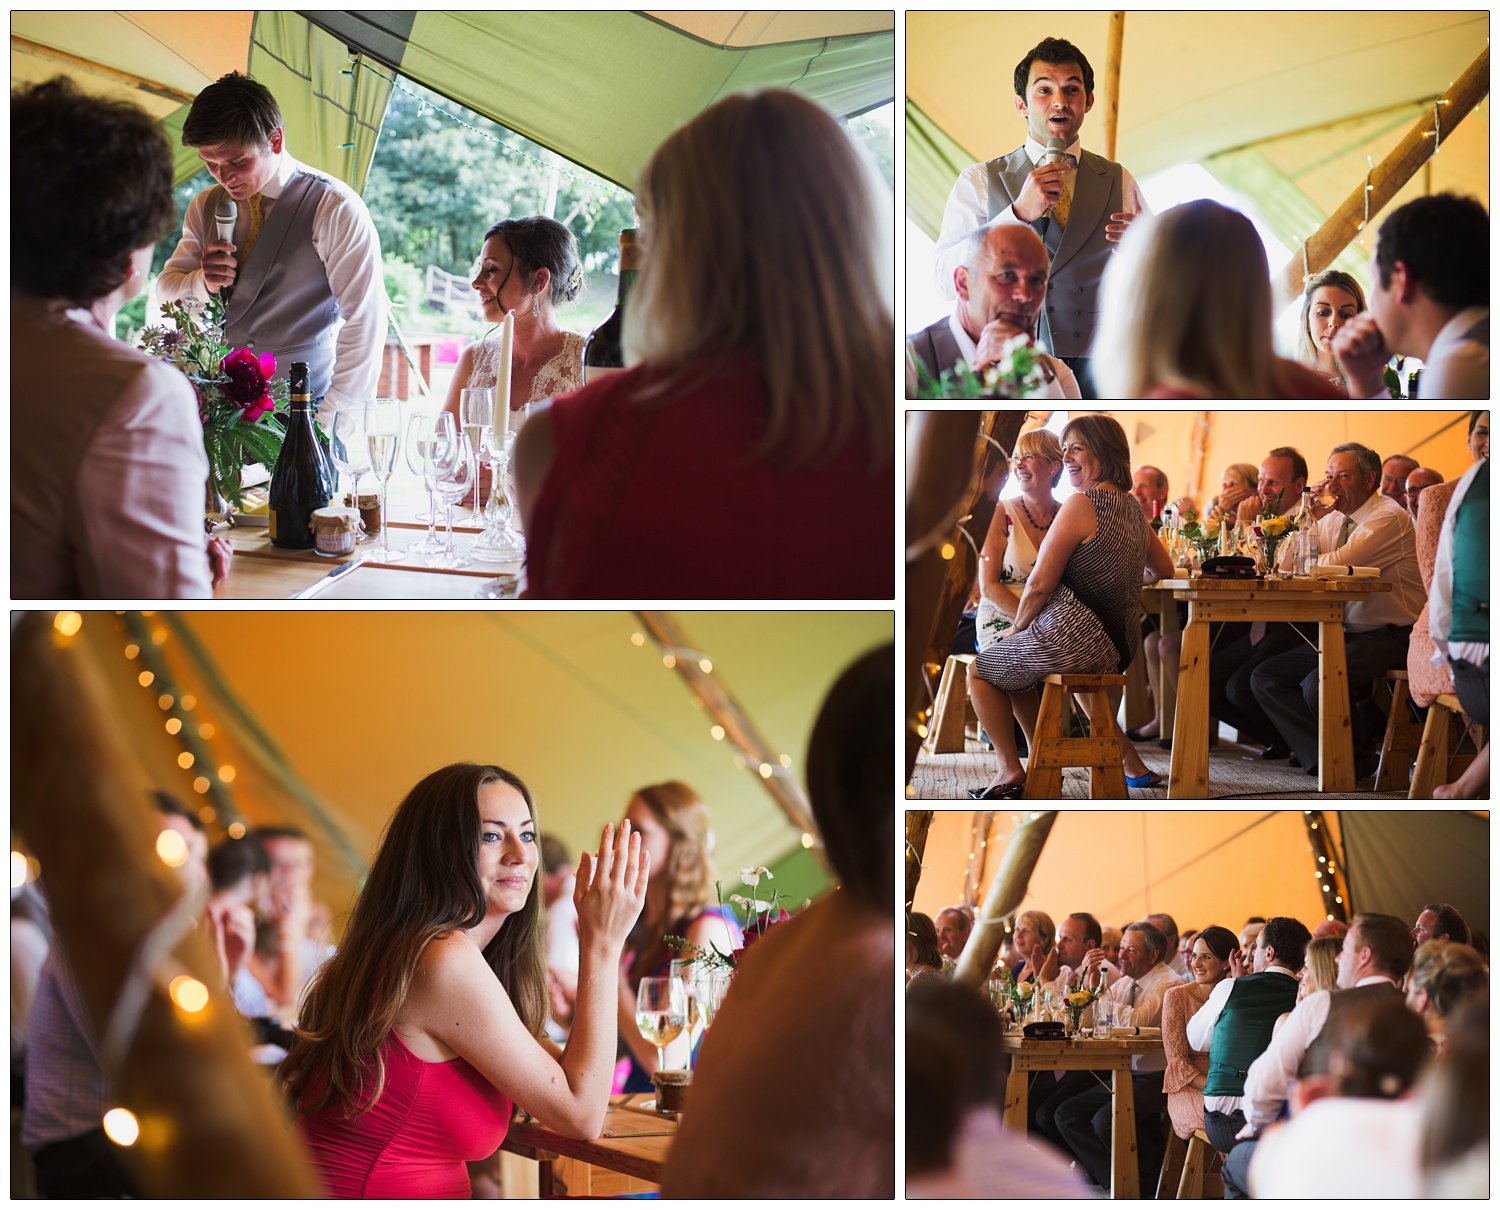 Wedding guests sat at benches during the speeches. There are glasses of wine on the tables. They are in a Tentipip.